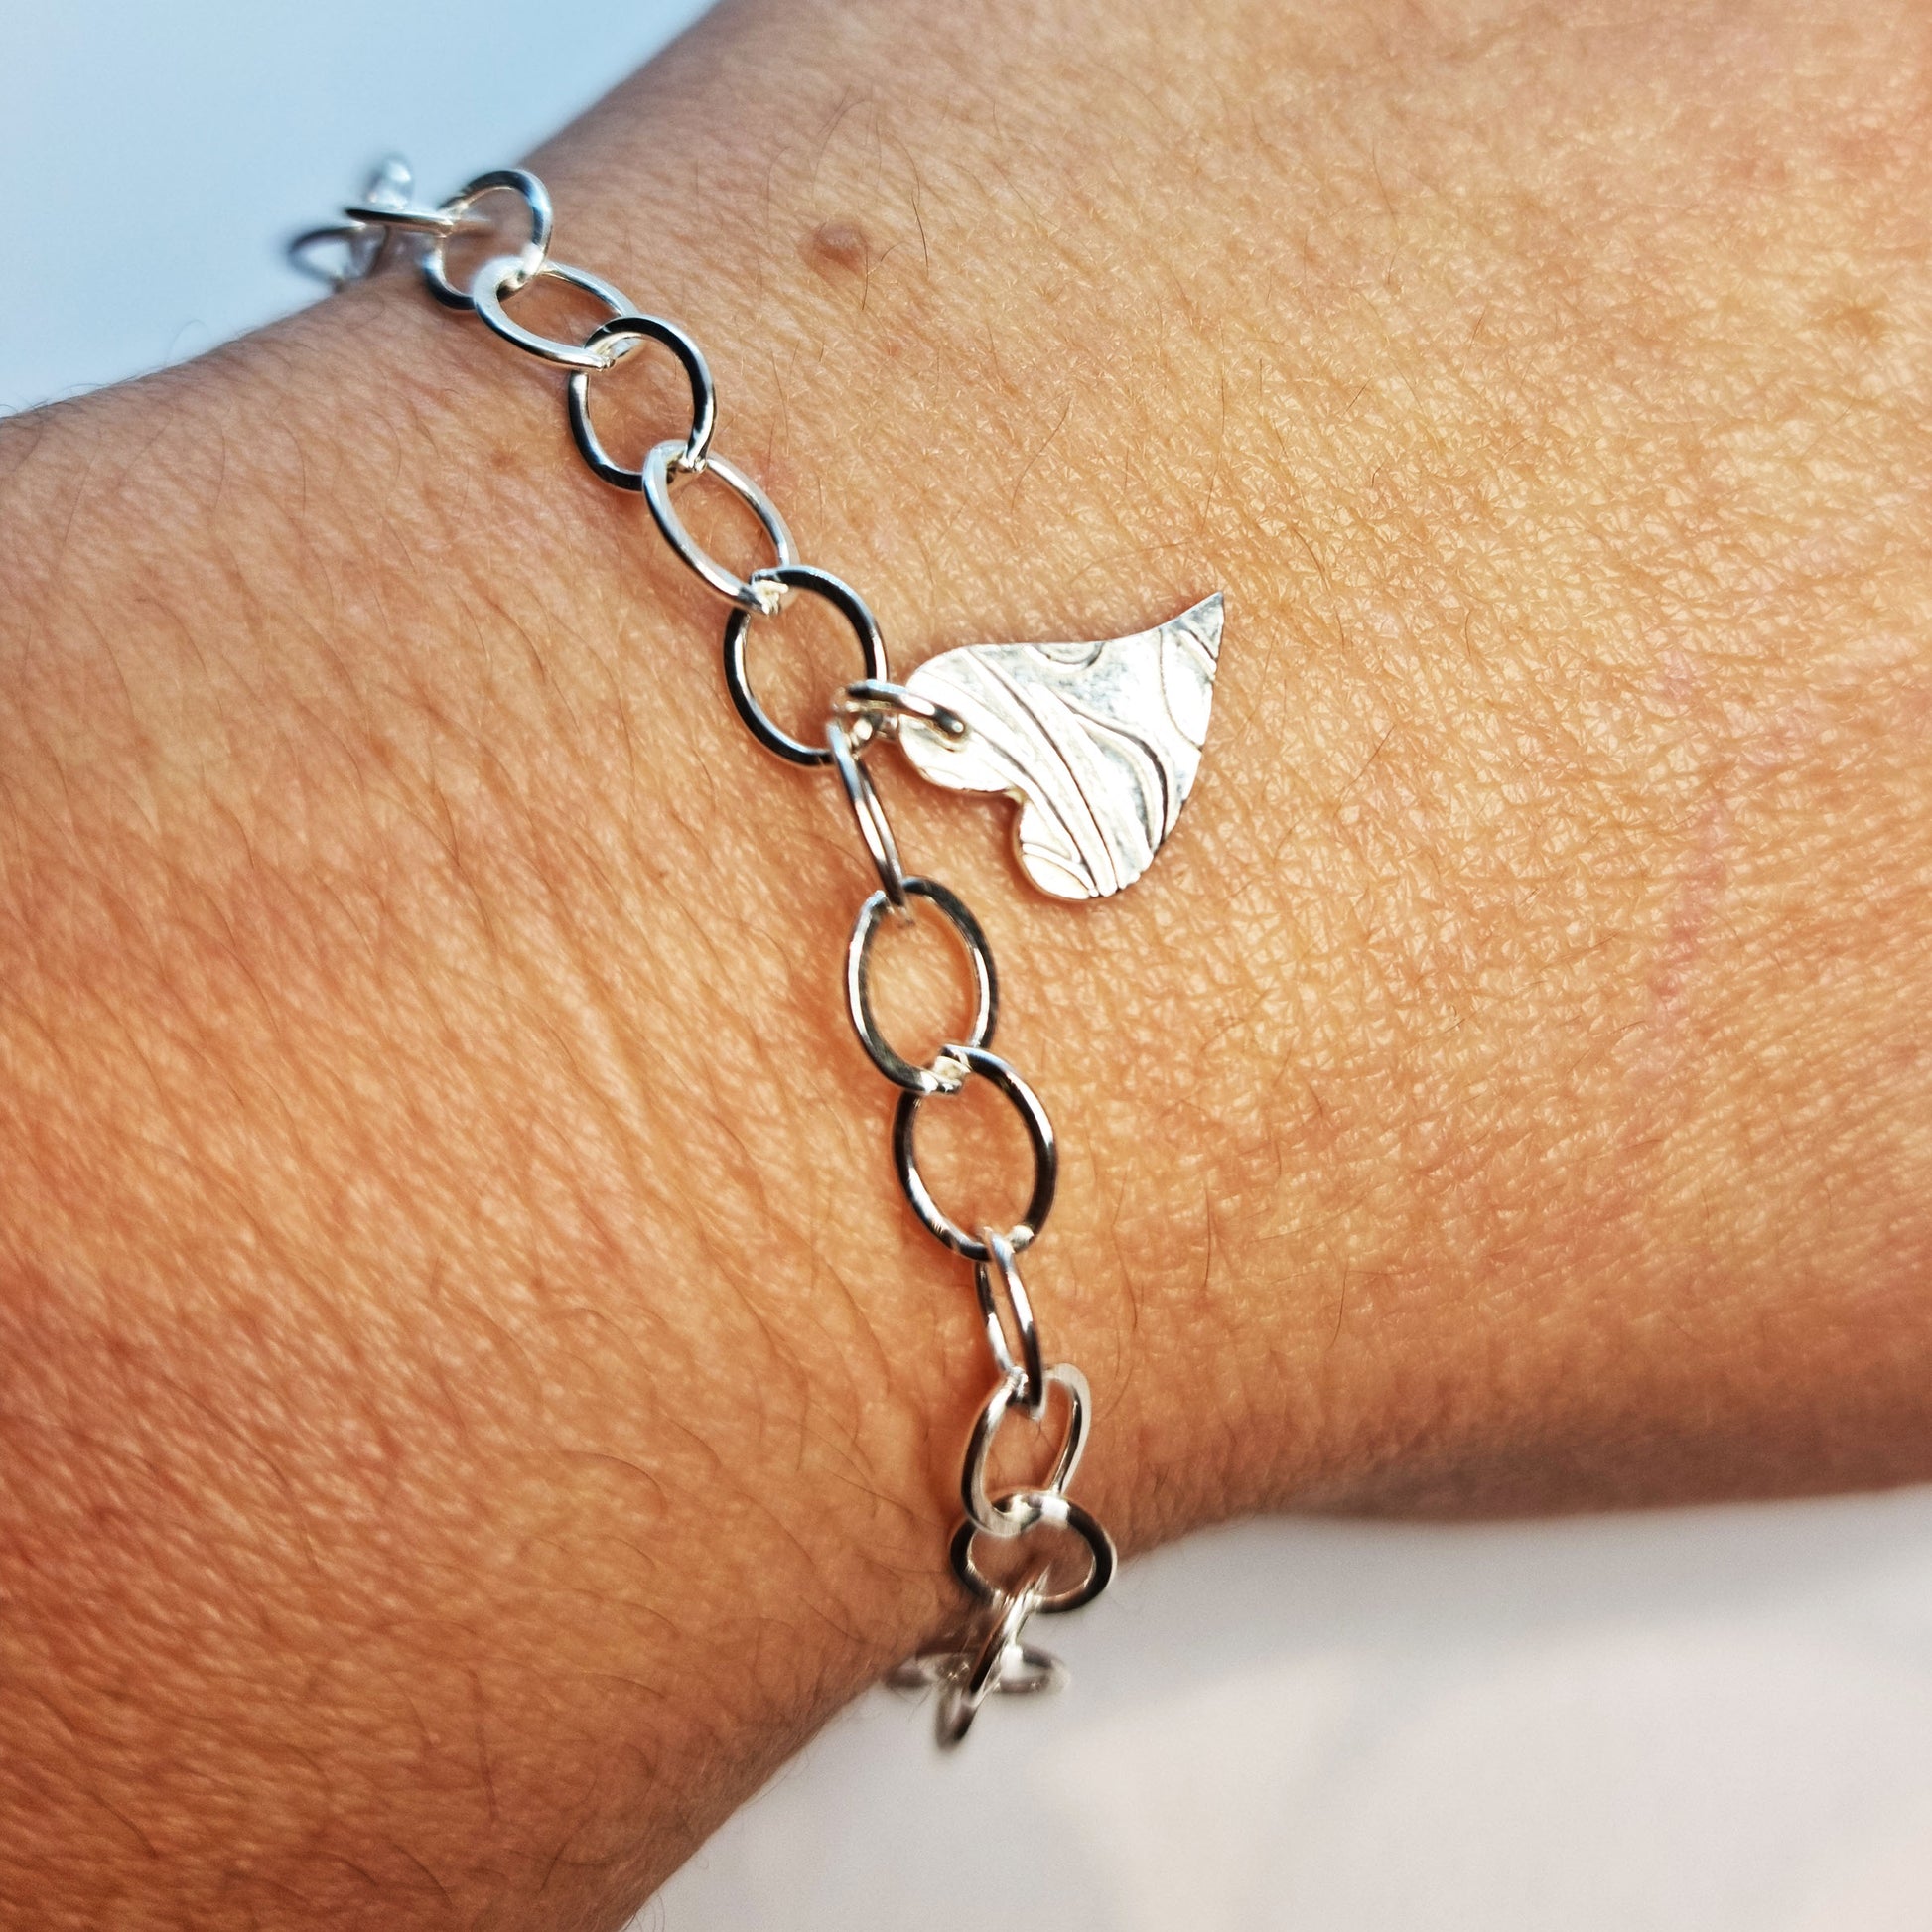 Silver large link chain bracelet with asymmetrical patterned heart charm. Shown on wrist